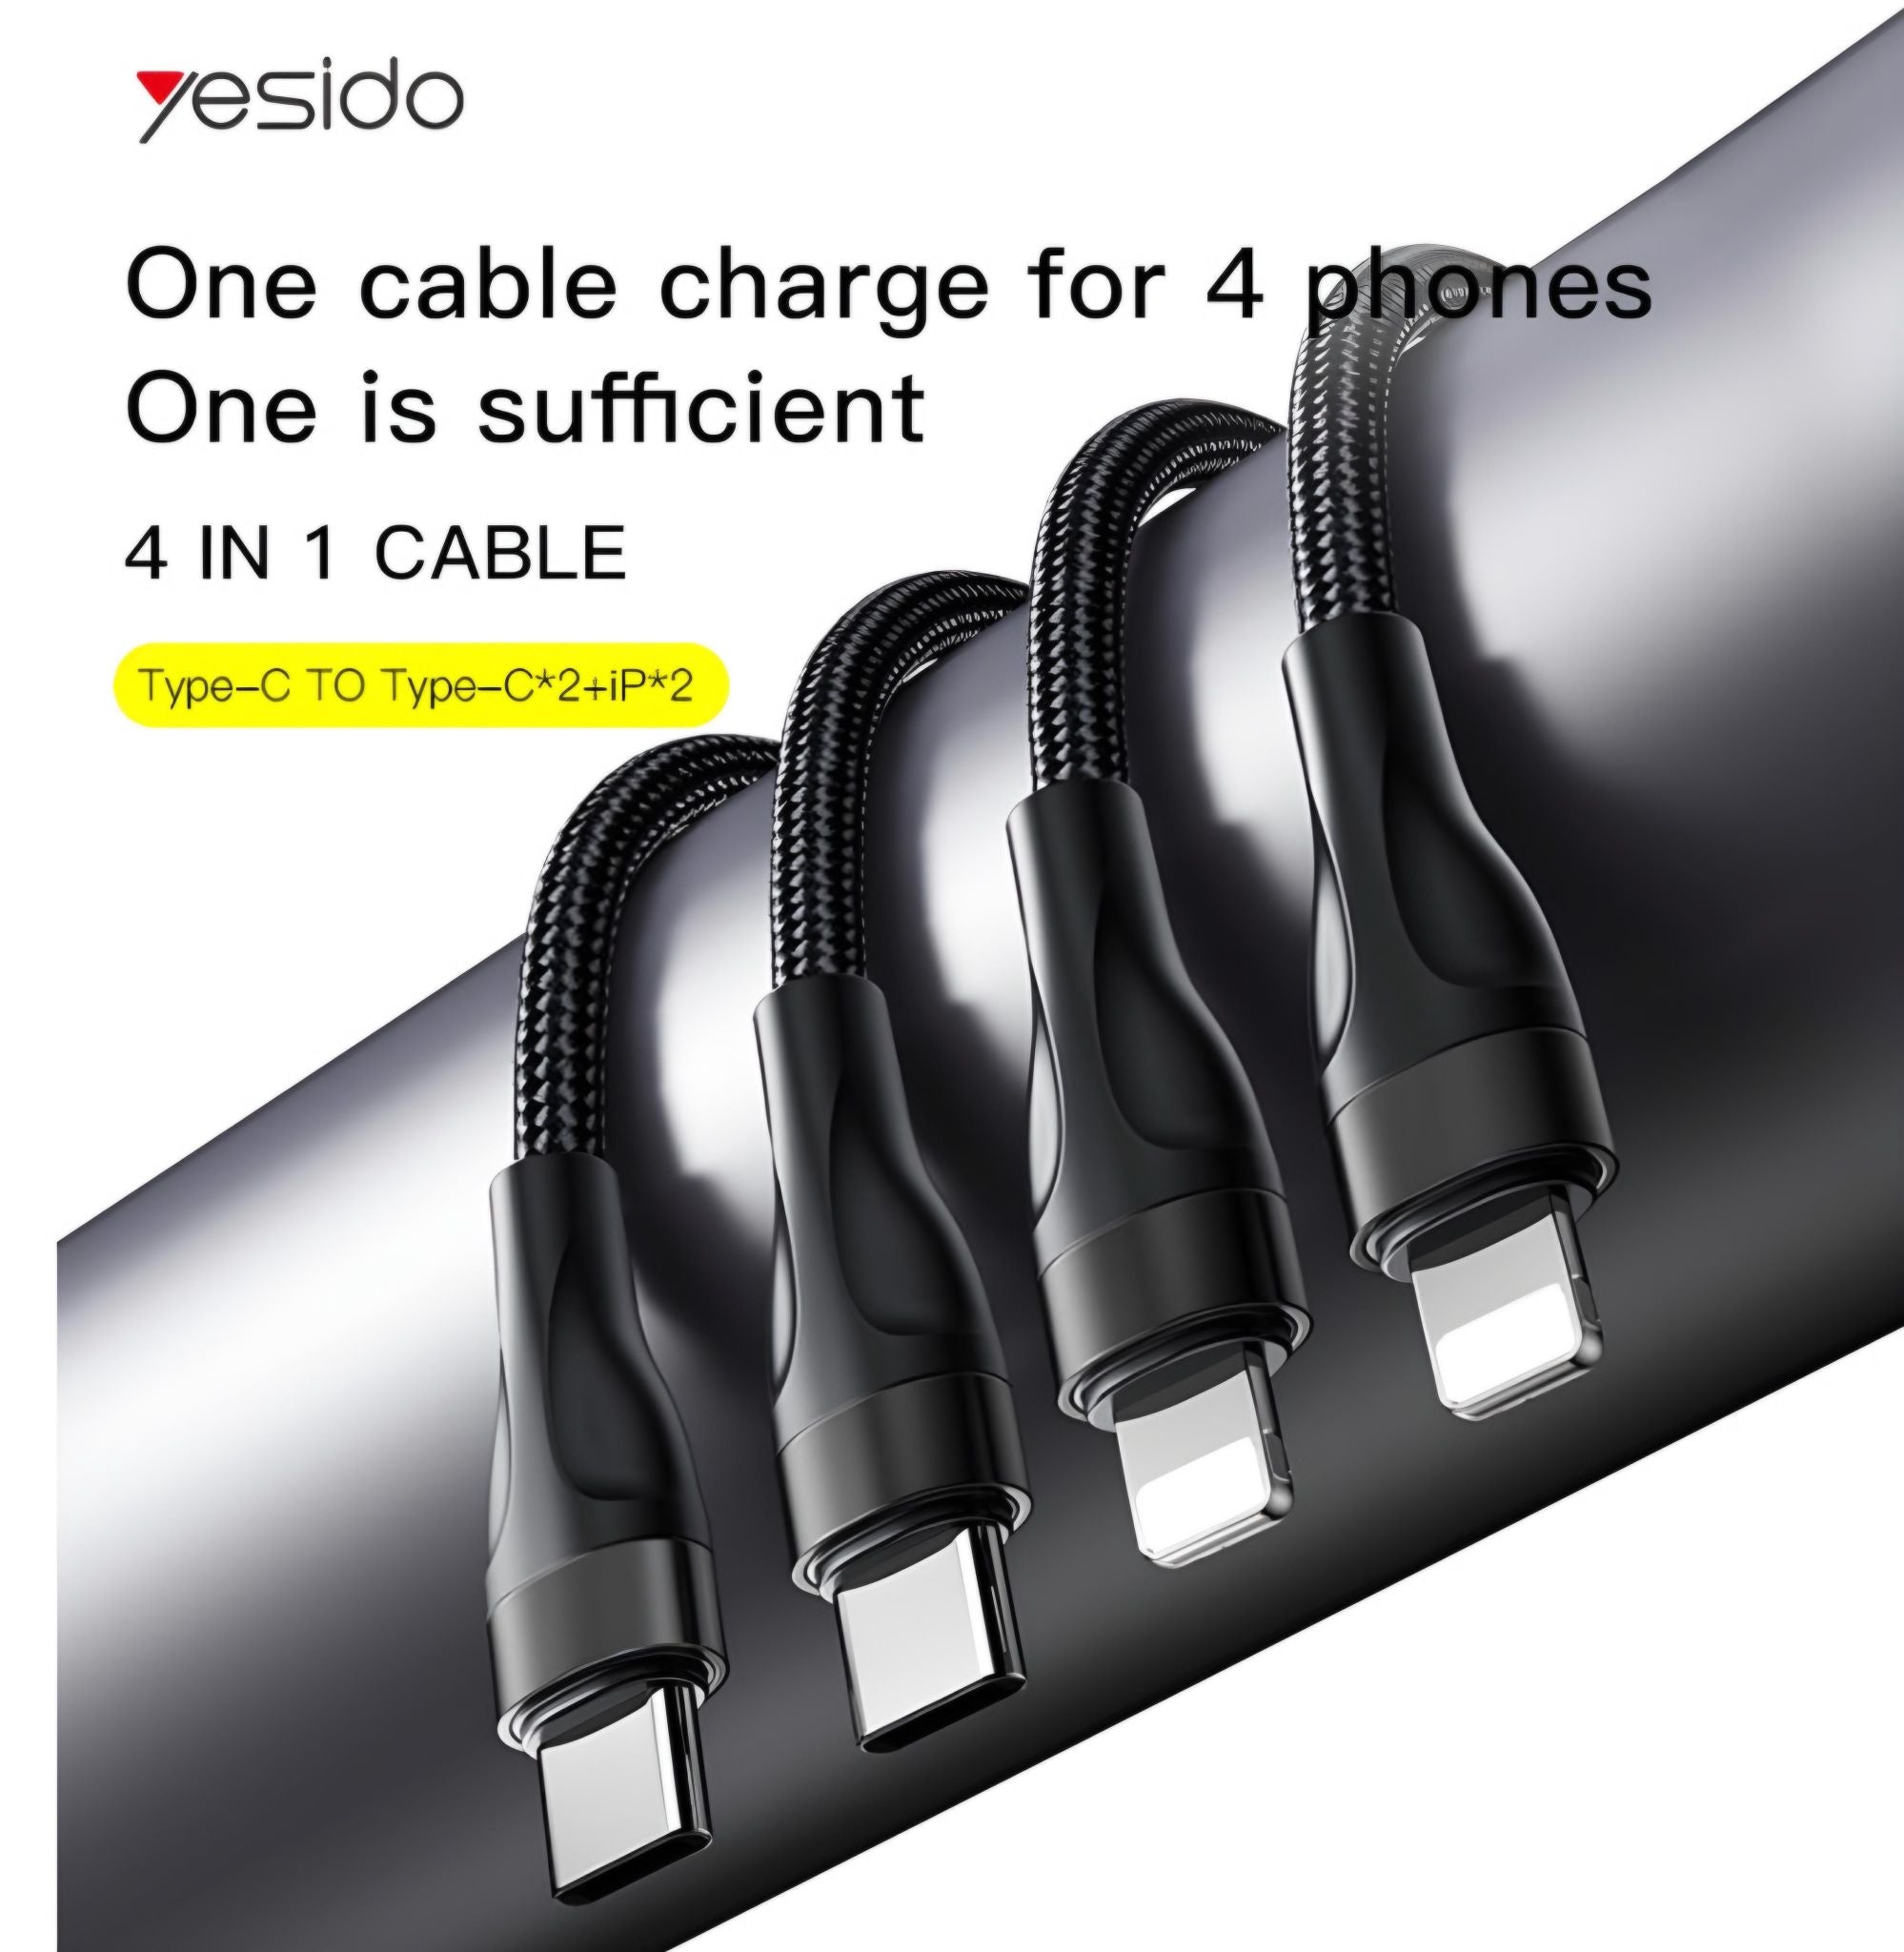 Yesido 4-in-1 Cable Set